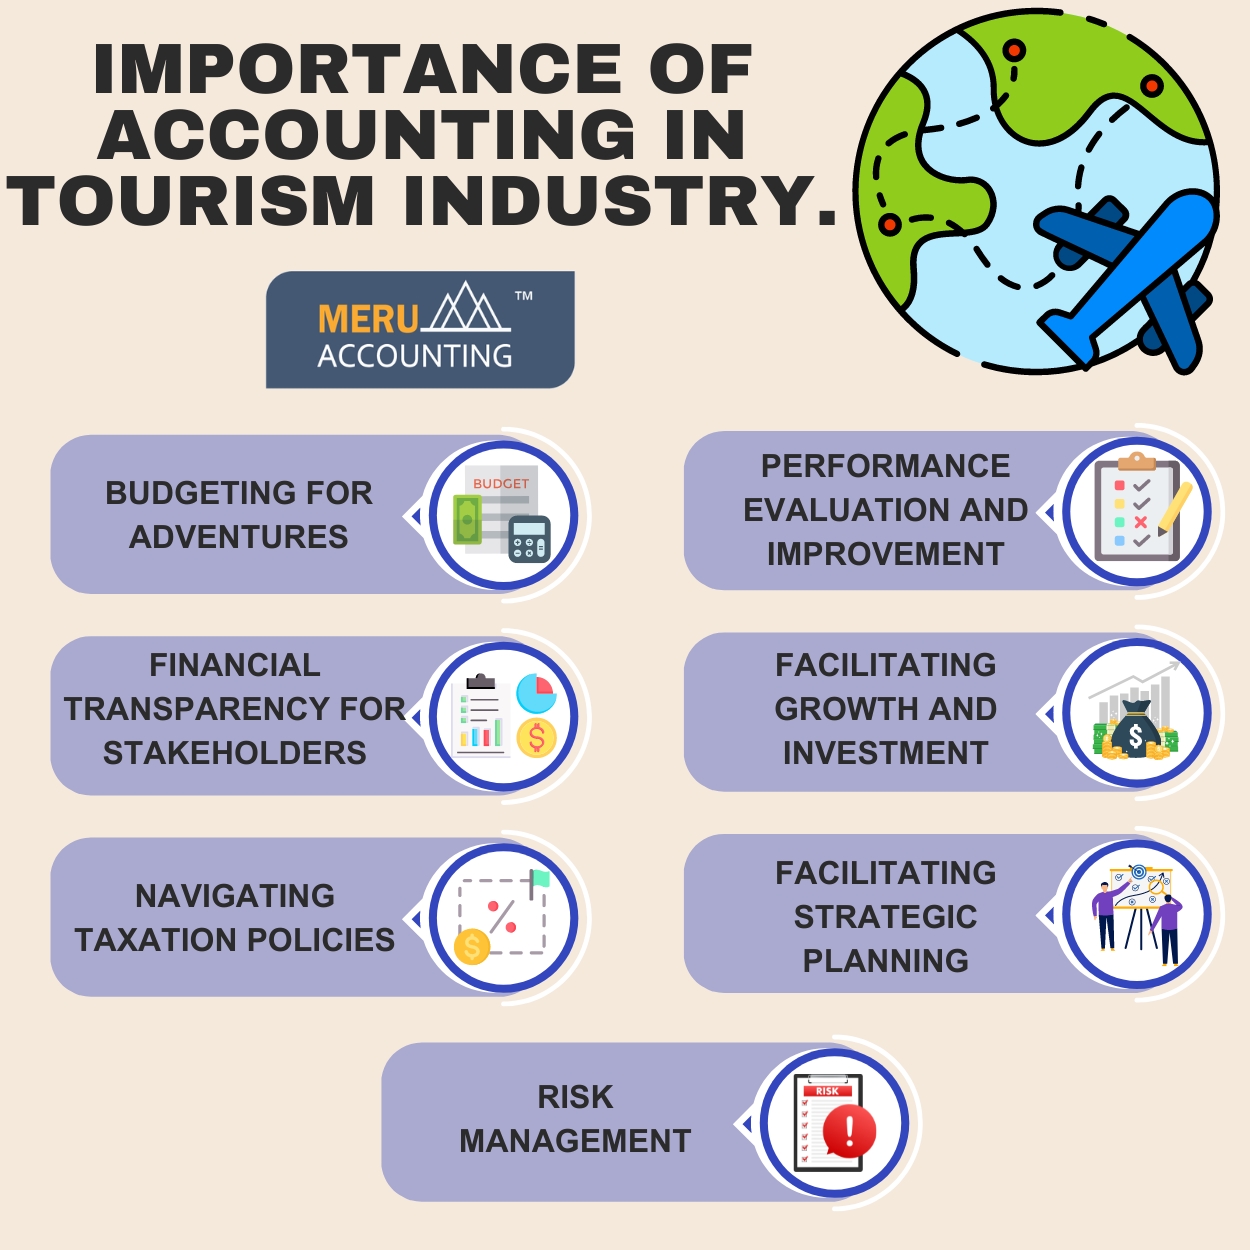 Importance of accounting in tourism industry 1250 by 1250 v1